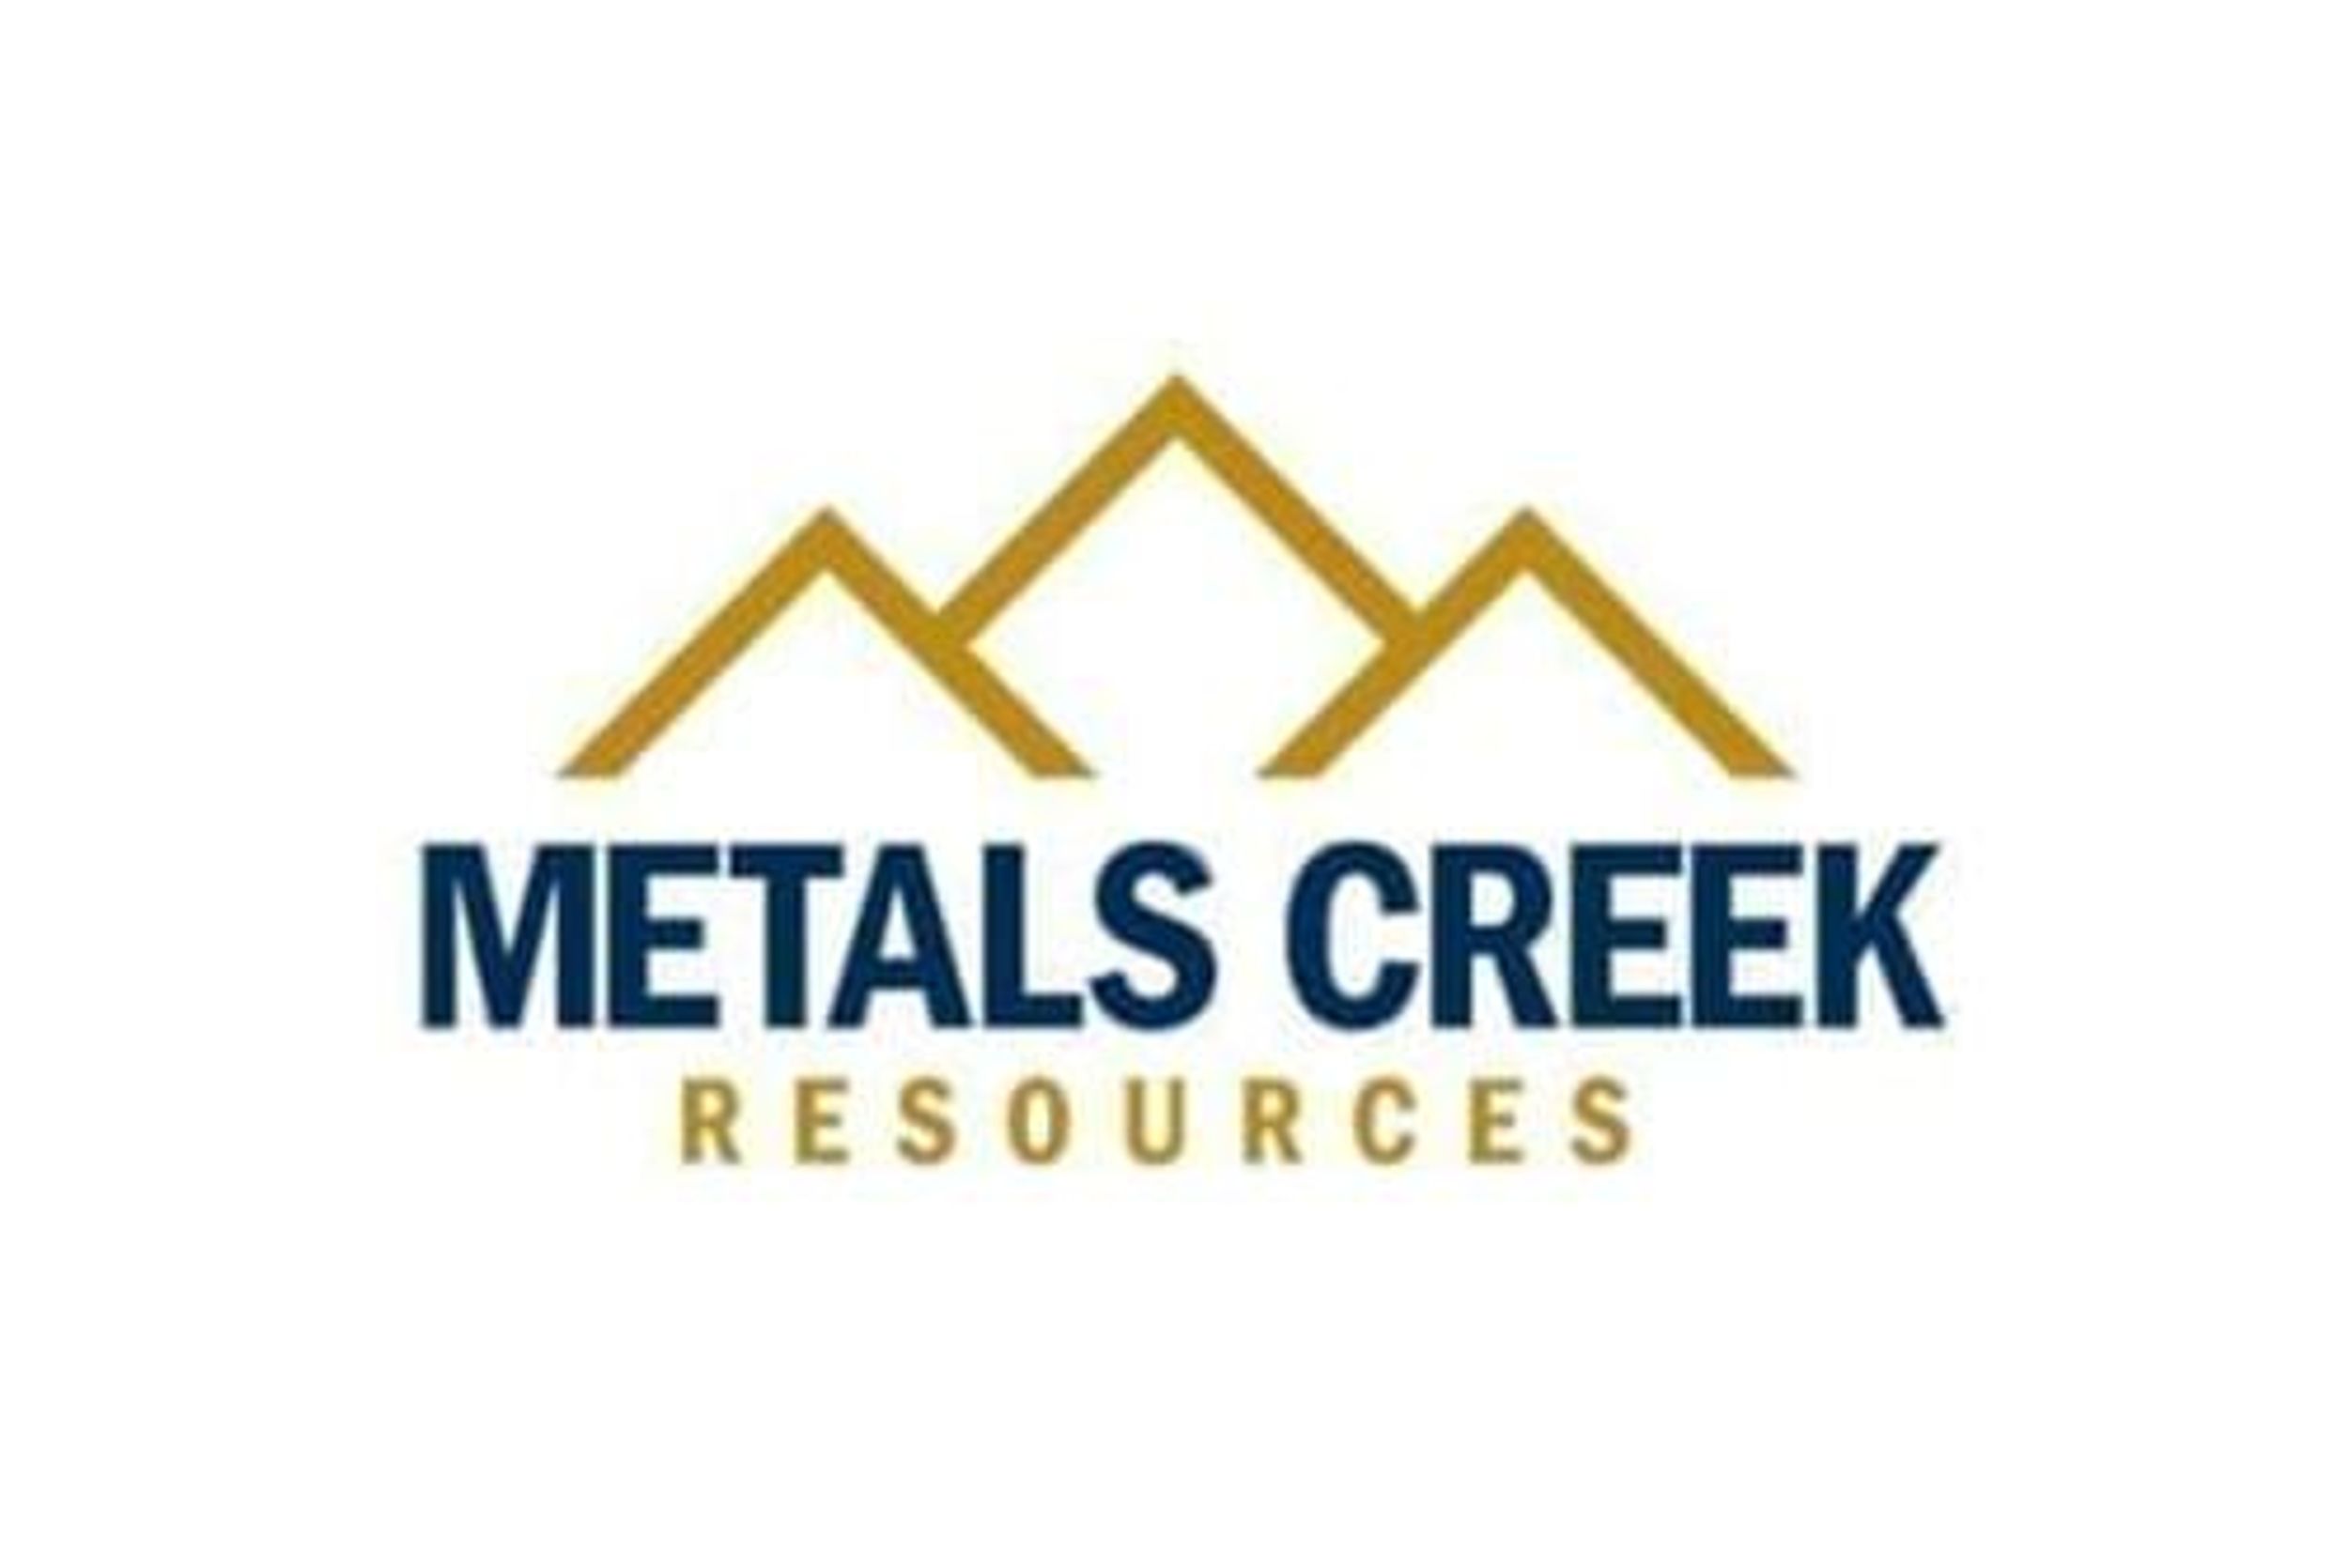 Metals Creek Drills 9.2 g/t Gold over 4.47 meters at the Ogden Gold Project